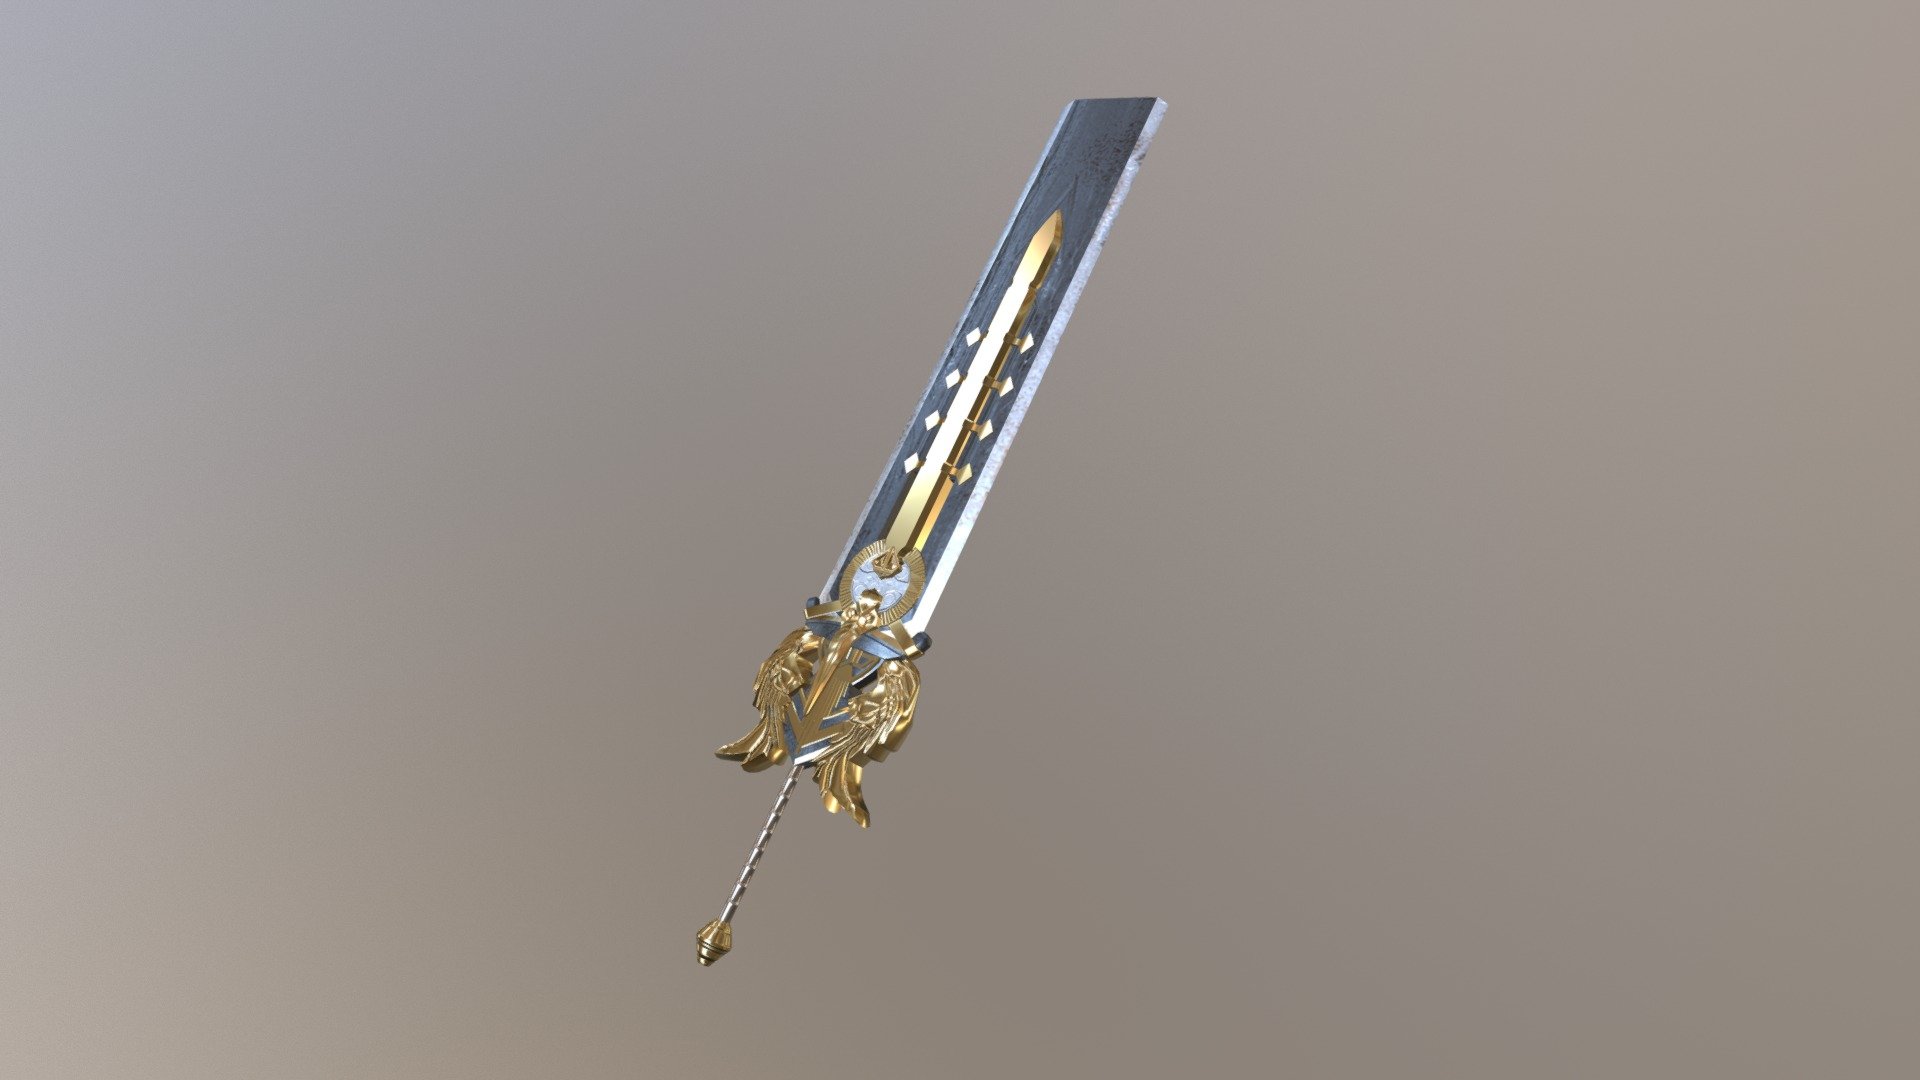 I will be honest this sword was tough lol but it was great experience. Learned alot from xnormals and baking normal maps using high and low ploy mesh.

Artstation - https://www.artstation.com/foxial Don't forget to find me on artstaion and Follow/Like! Enjoy - Gladiolus Amicitia Heavy Sword - 3D model by Foxial (@DragonDojimaLegendFoxial) 3d model